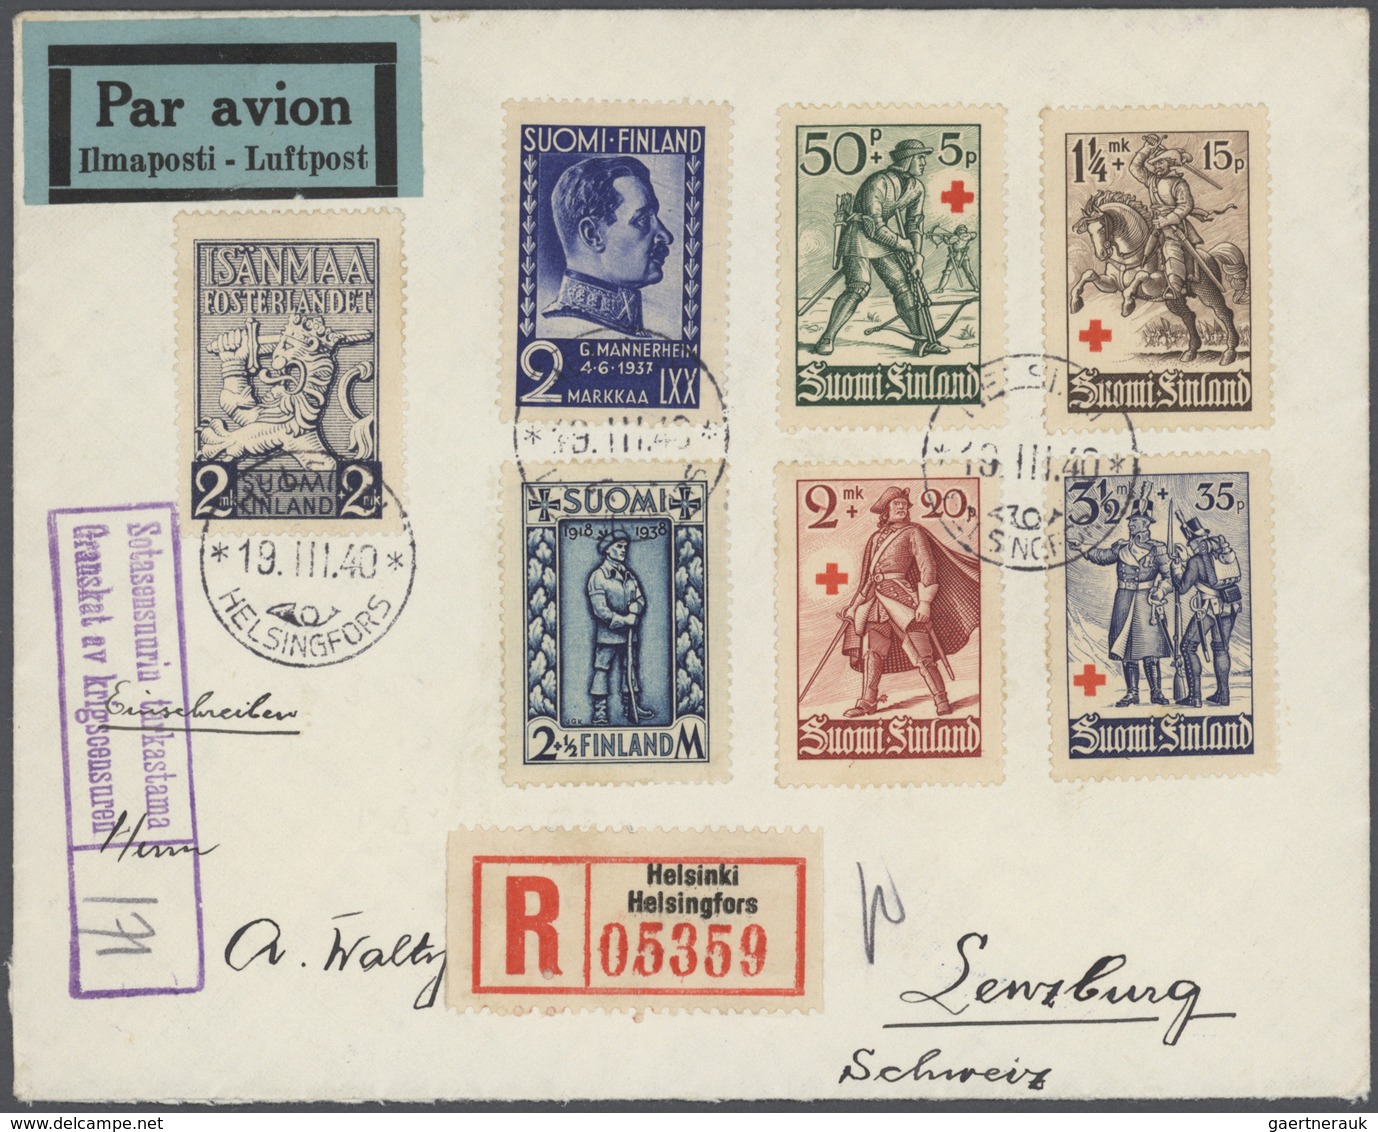 Finnland: 1926/1952, a lovely assortment of more than 80 entires, showing many attractive frankings,